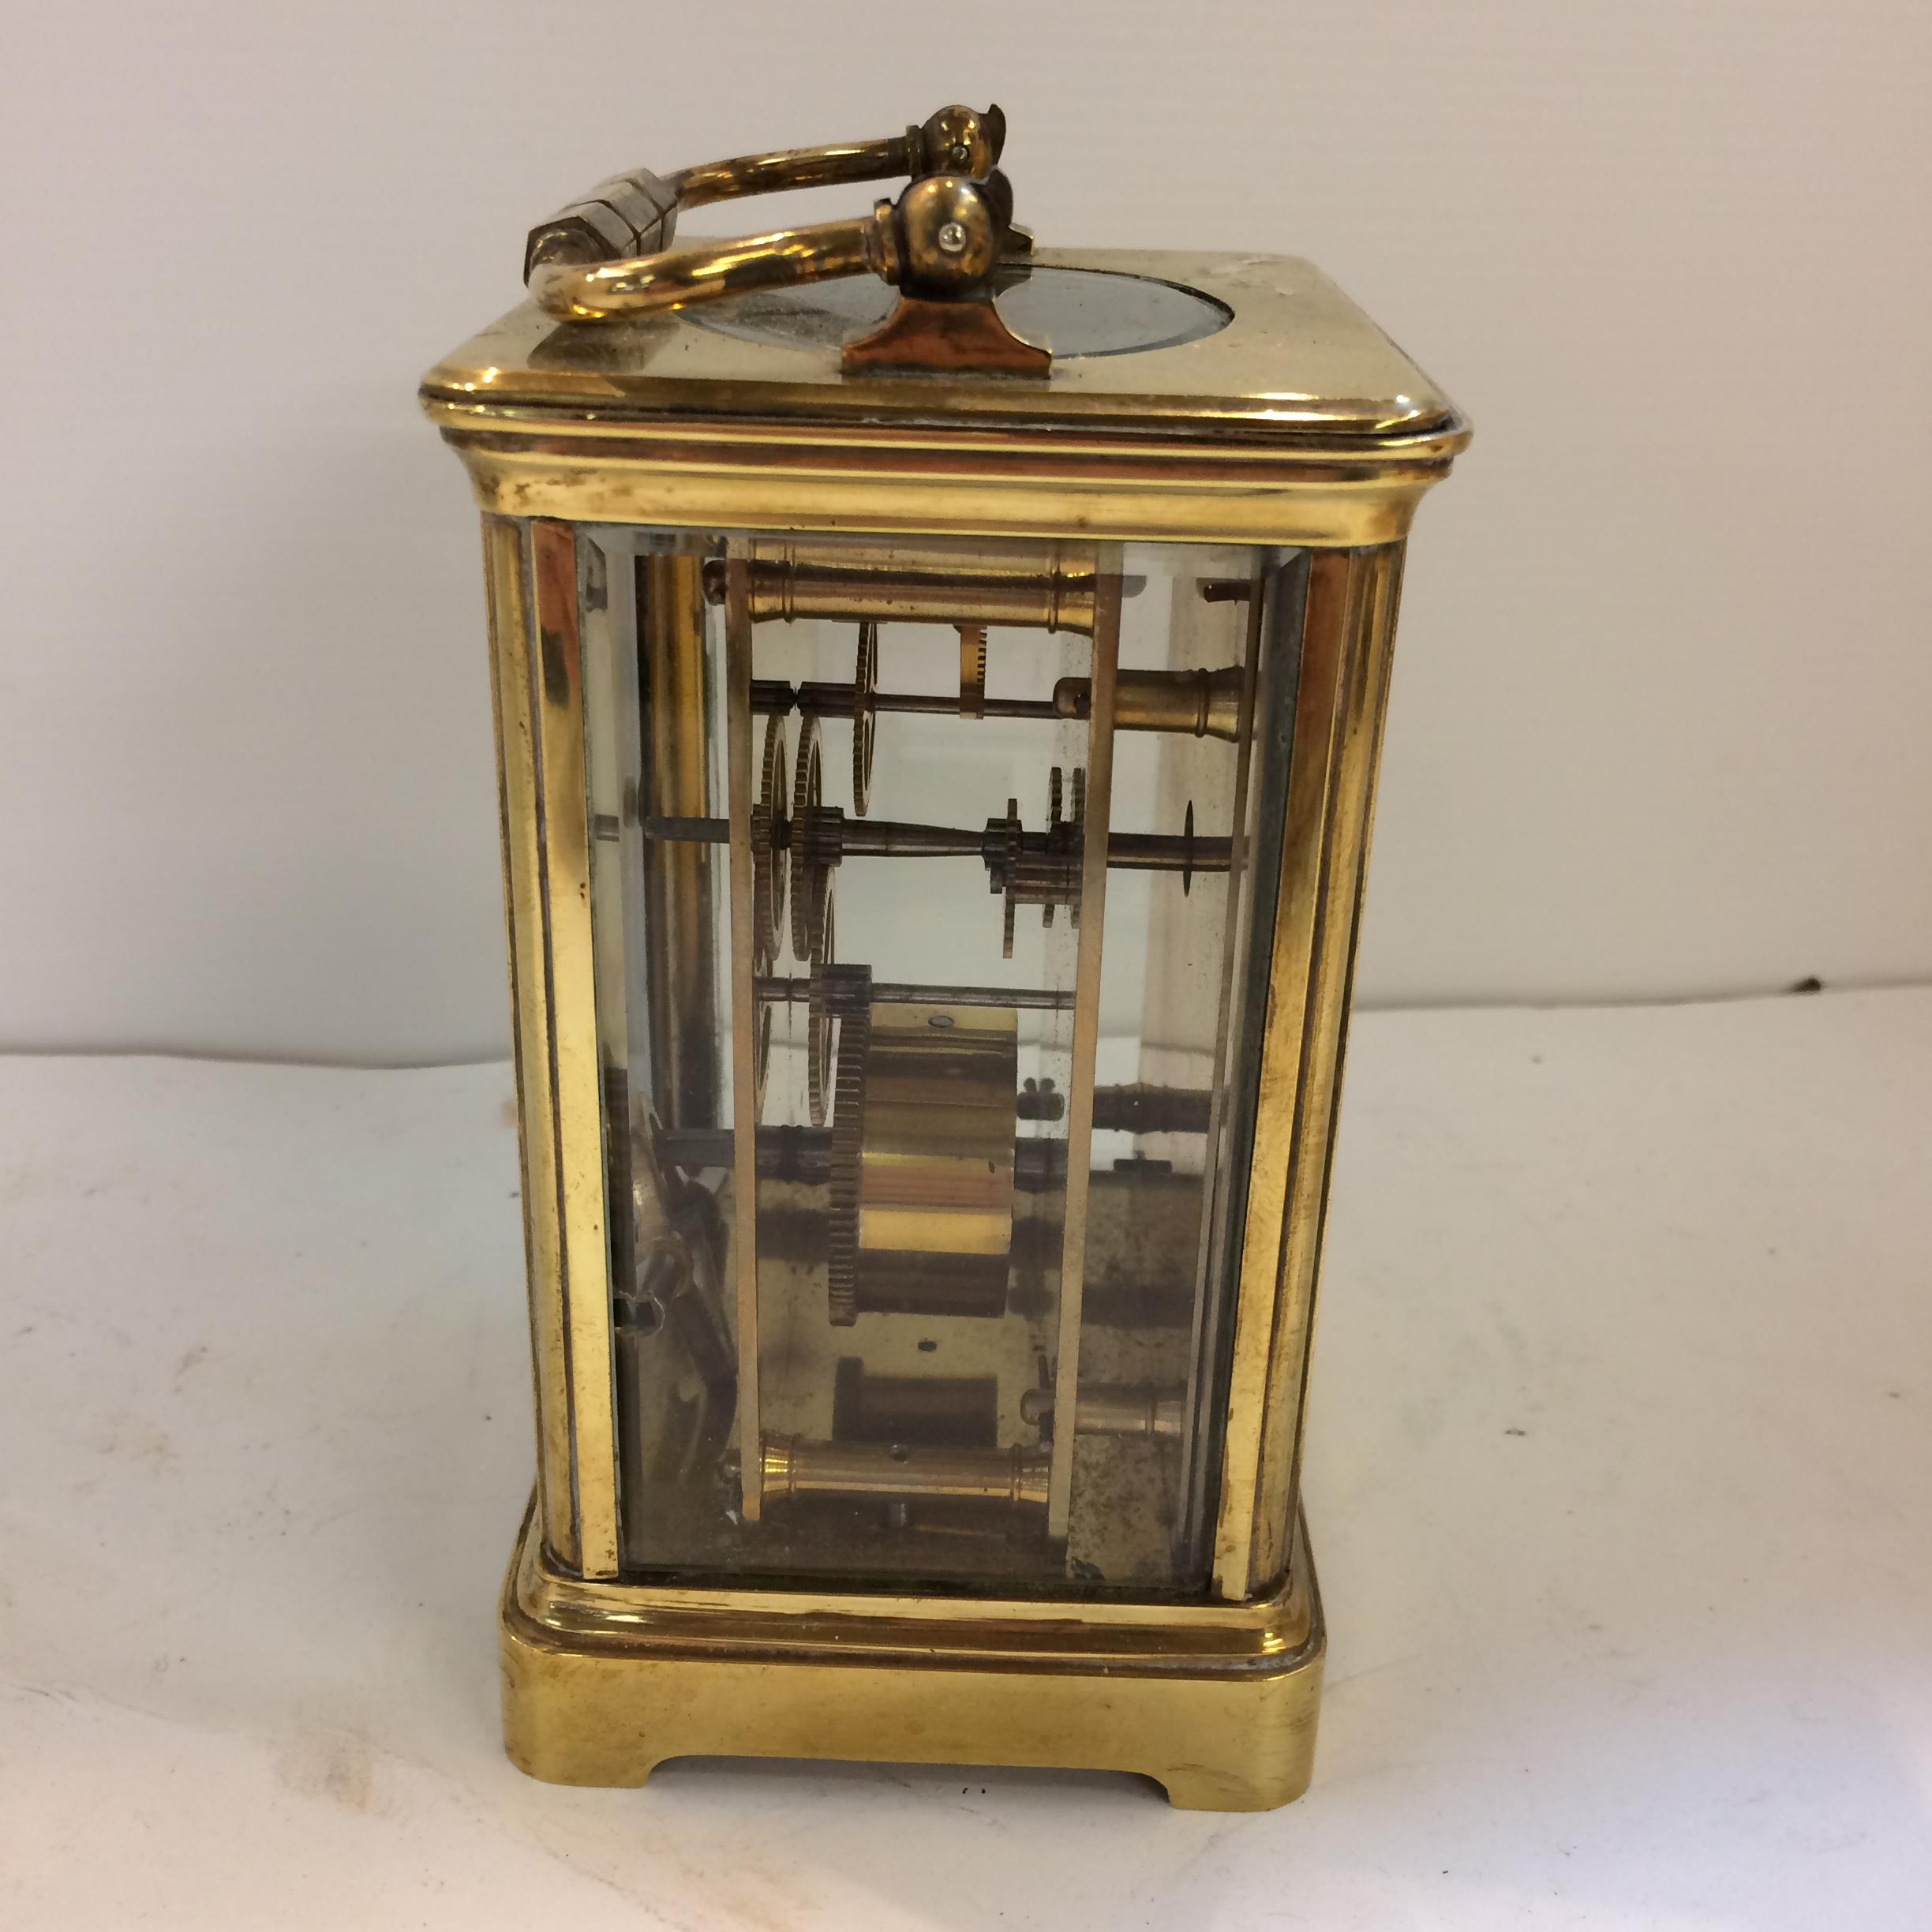 French gilt brass carriage clock with 4 bevelled glass panes with key - Image 4 of 5